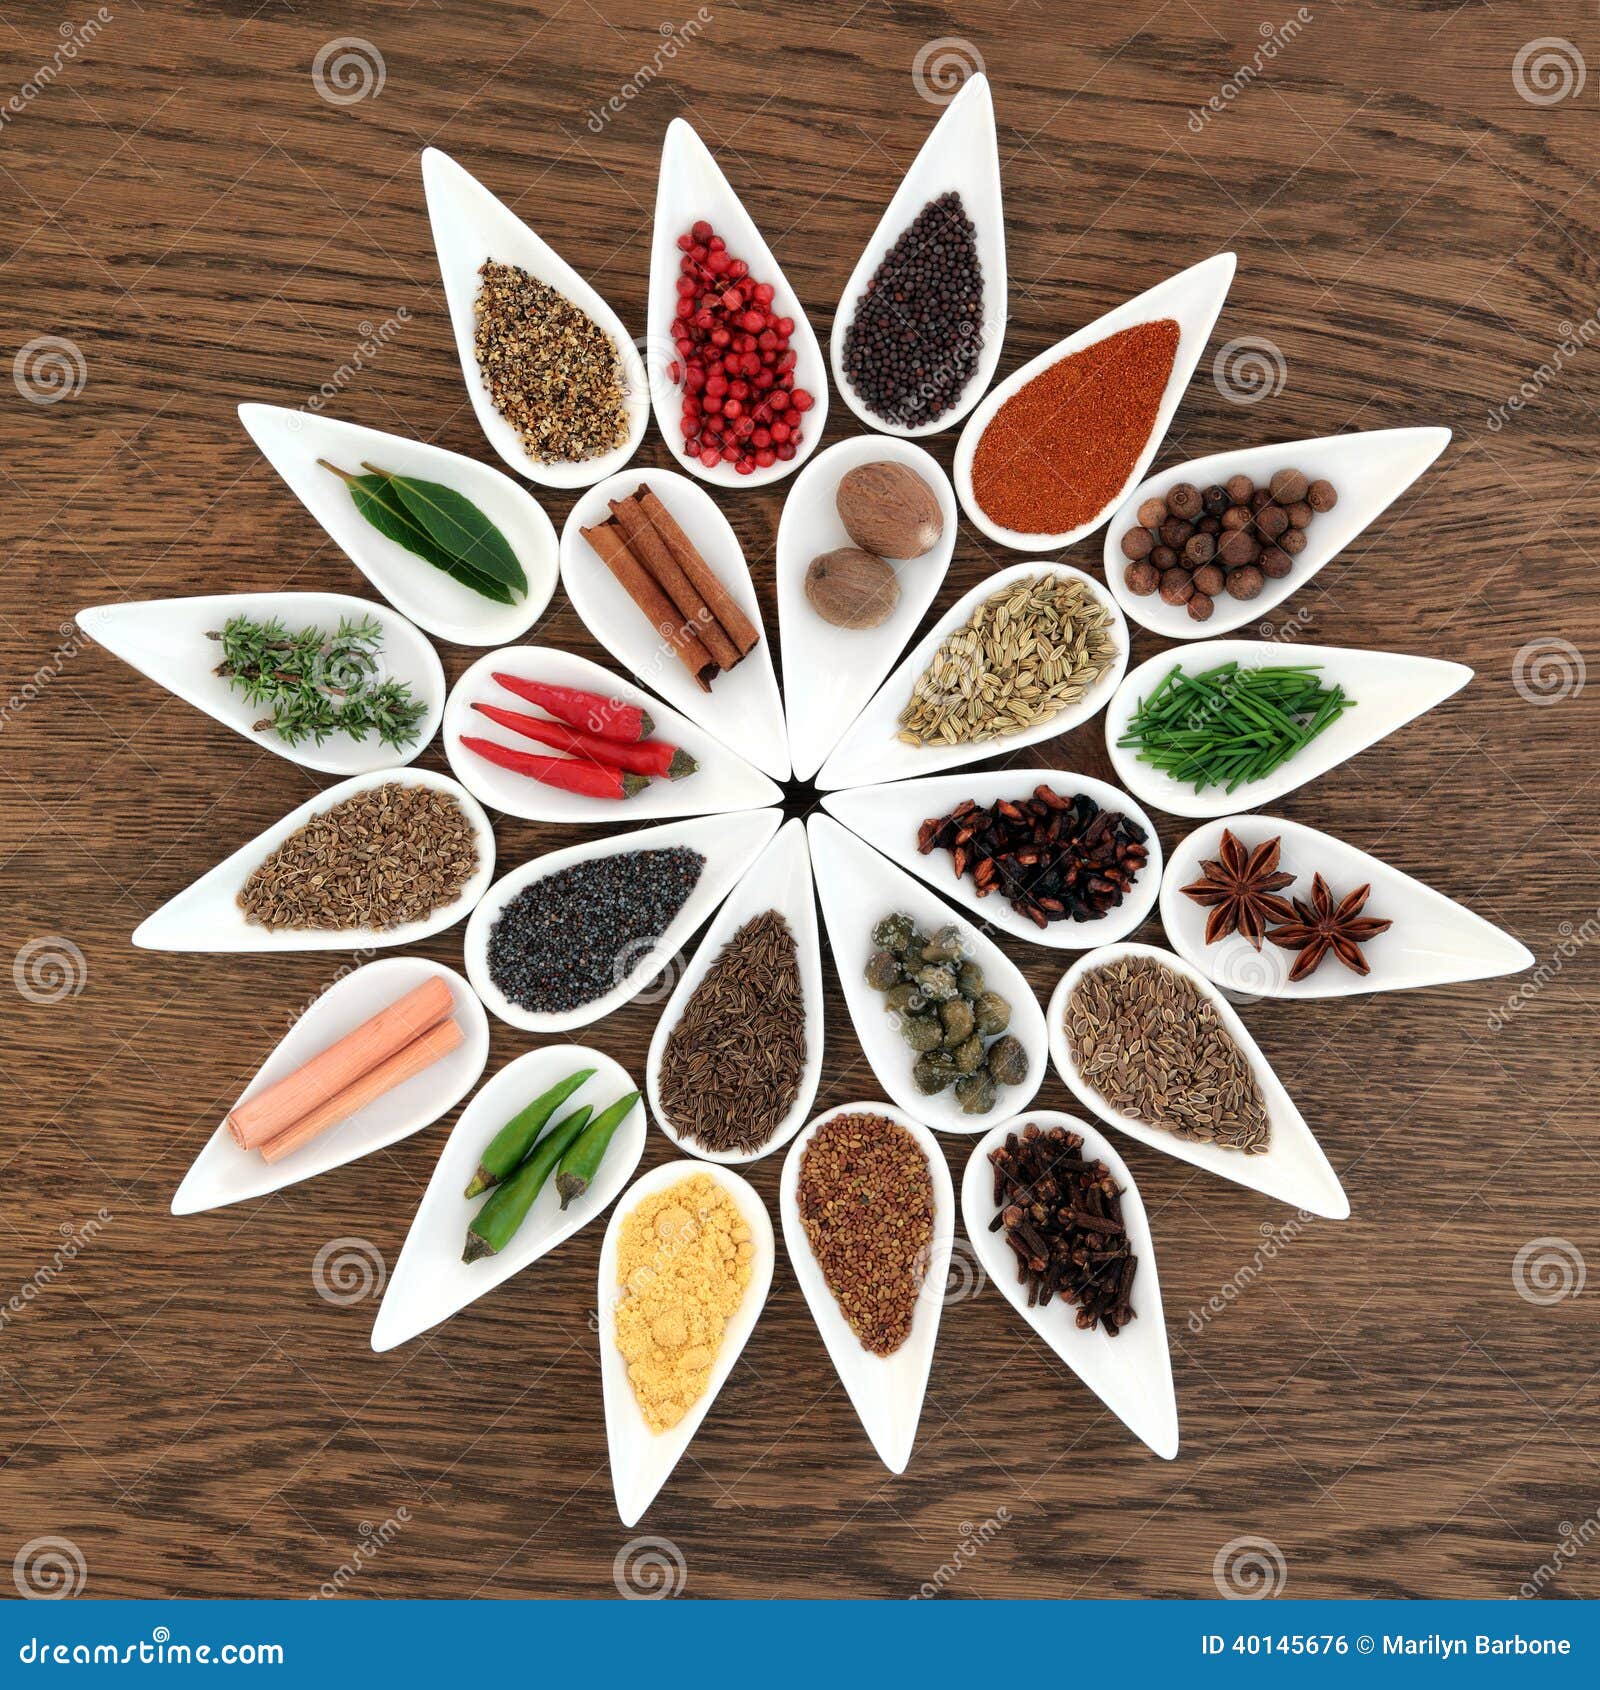 herb and spice wheel